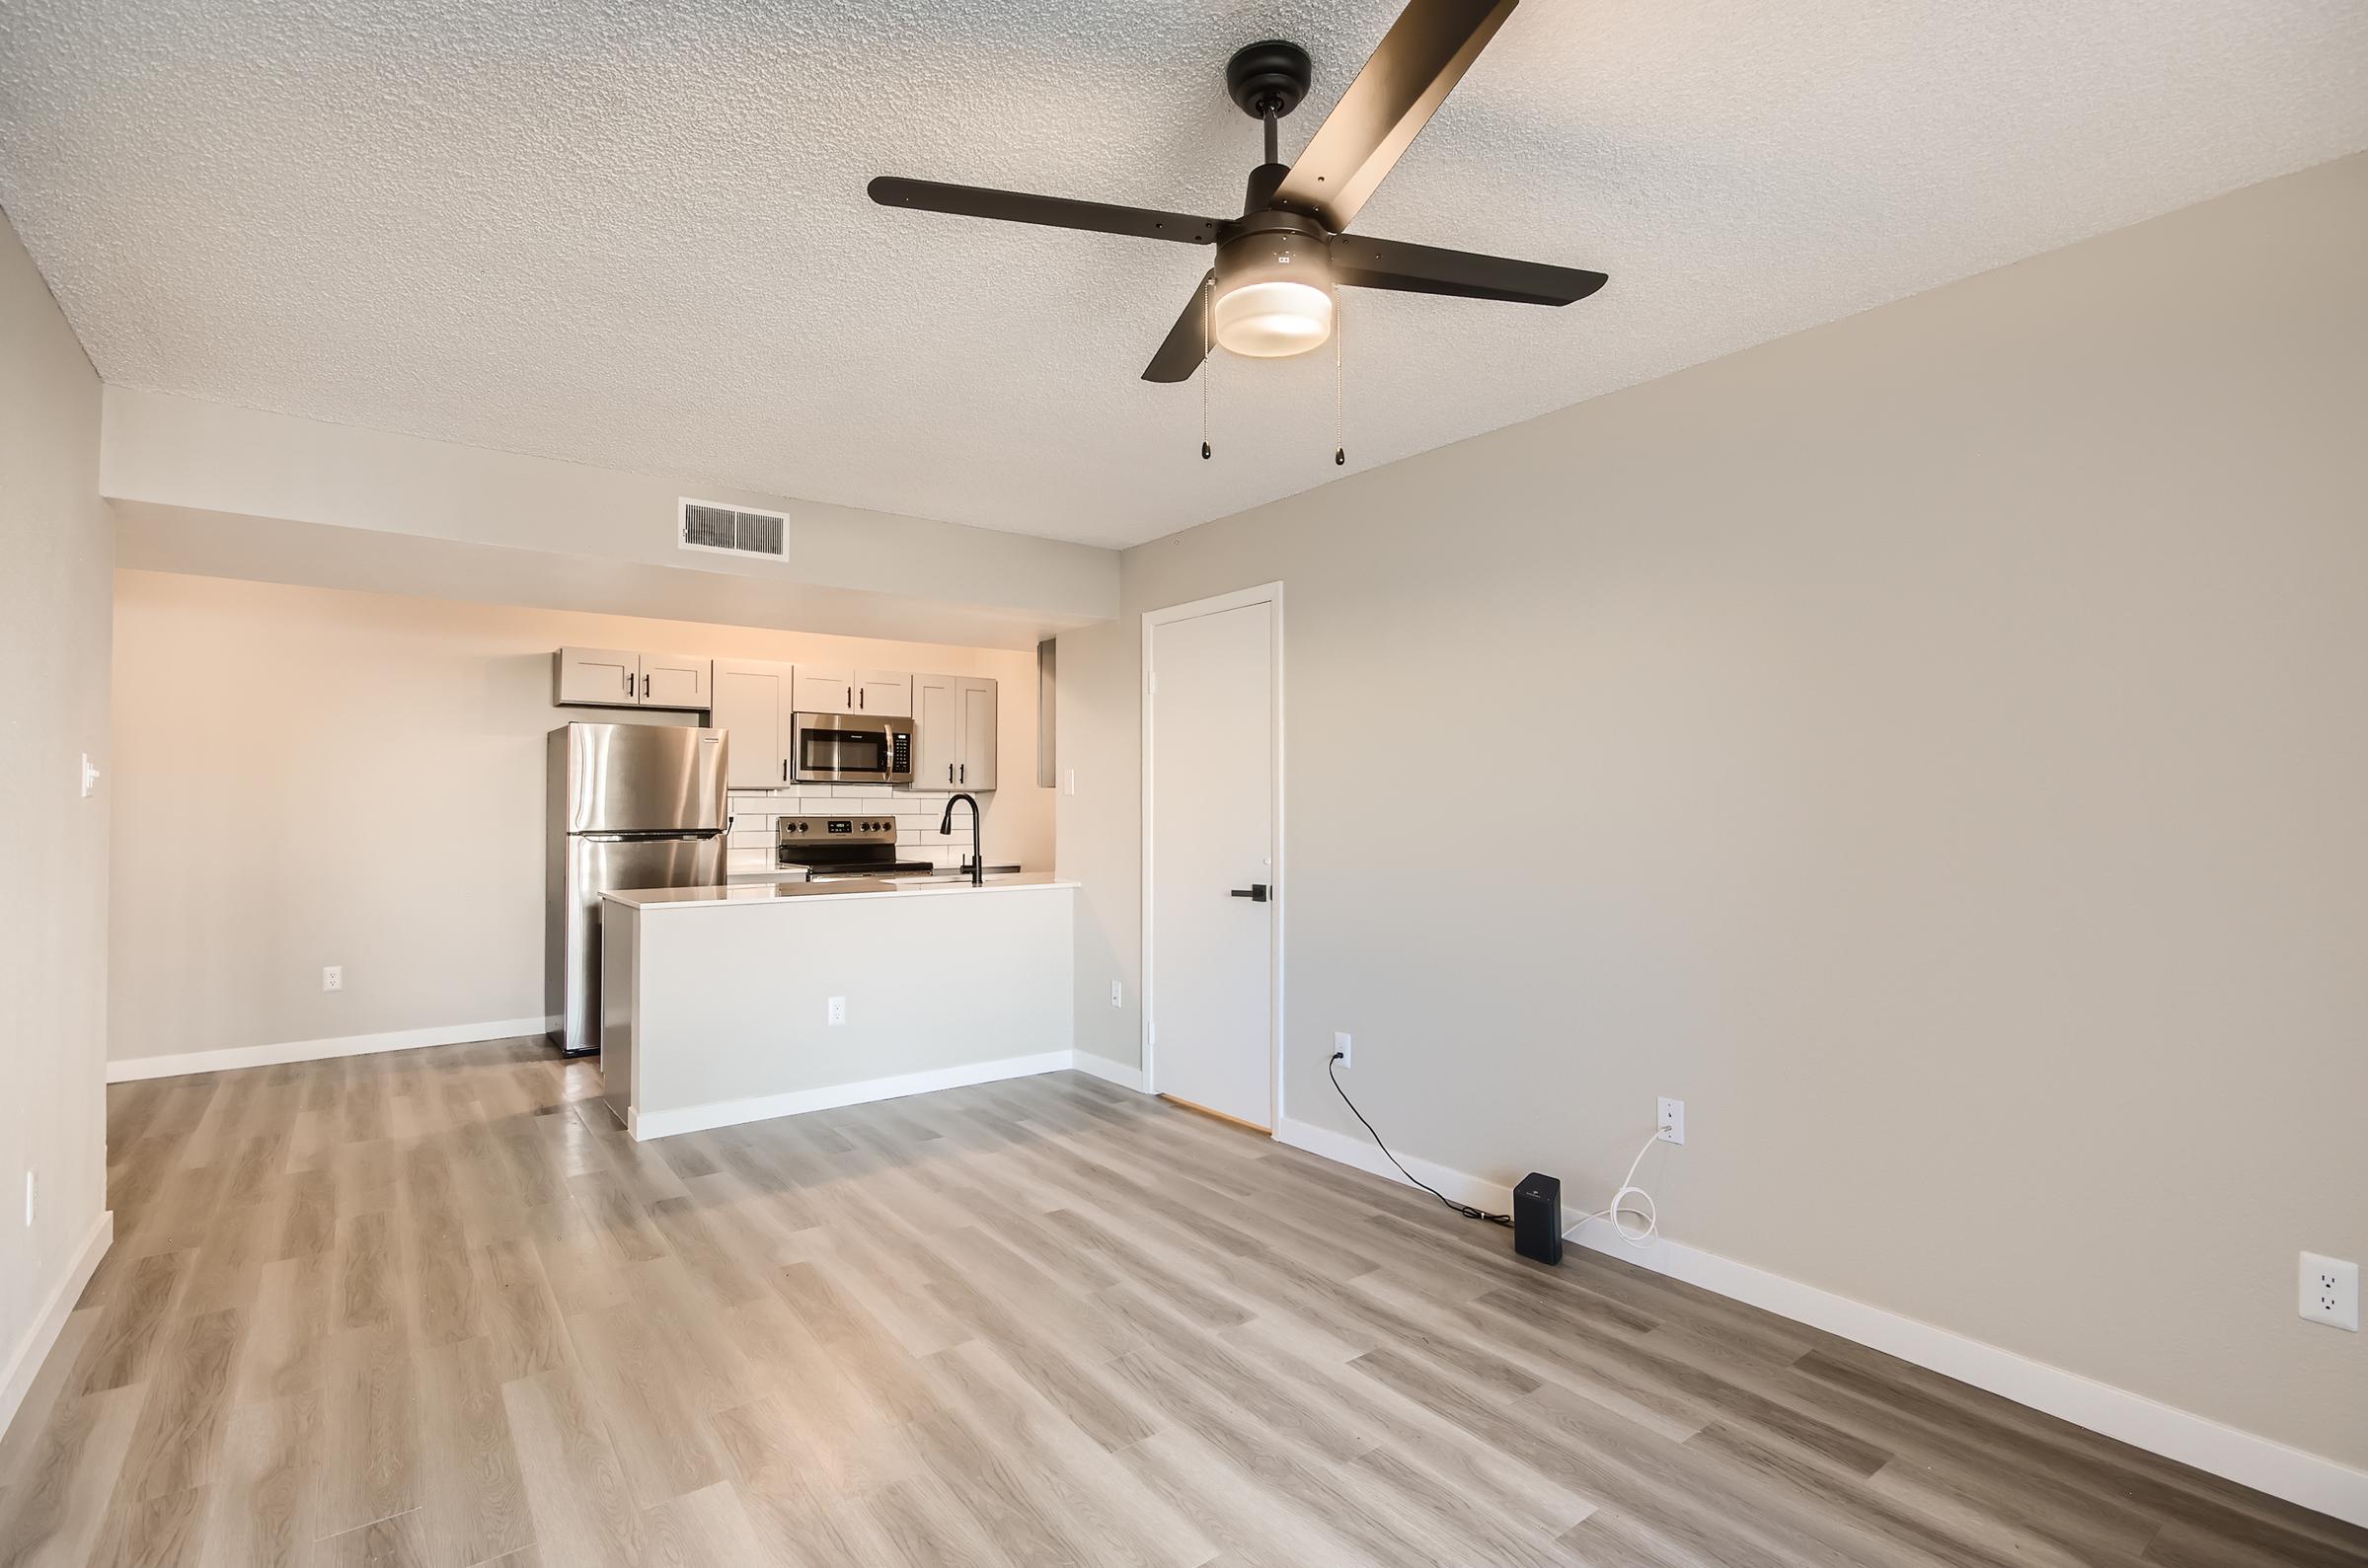 The open concept living space with wood-style floors and a kitchen at Rise on McClintock.